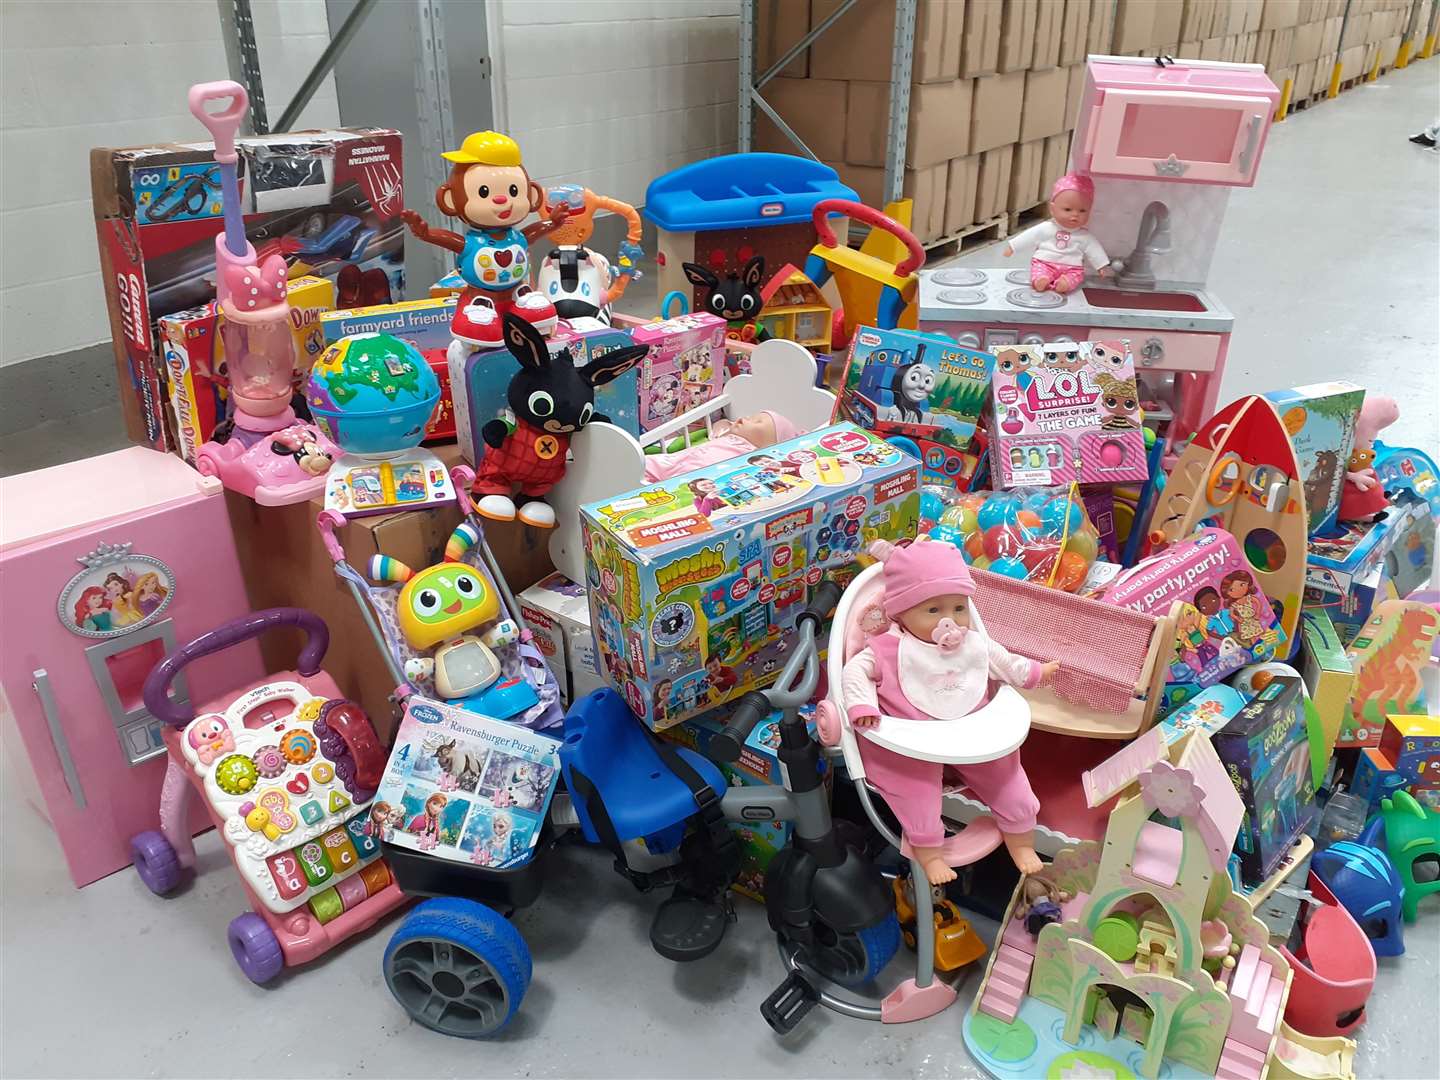 Toy Rehoming Scheme with the Salvation Army